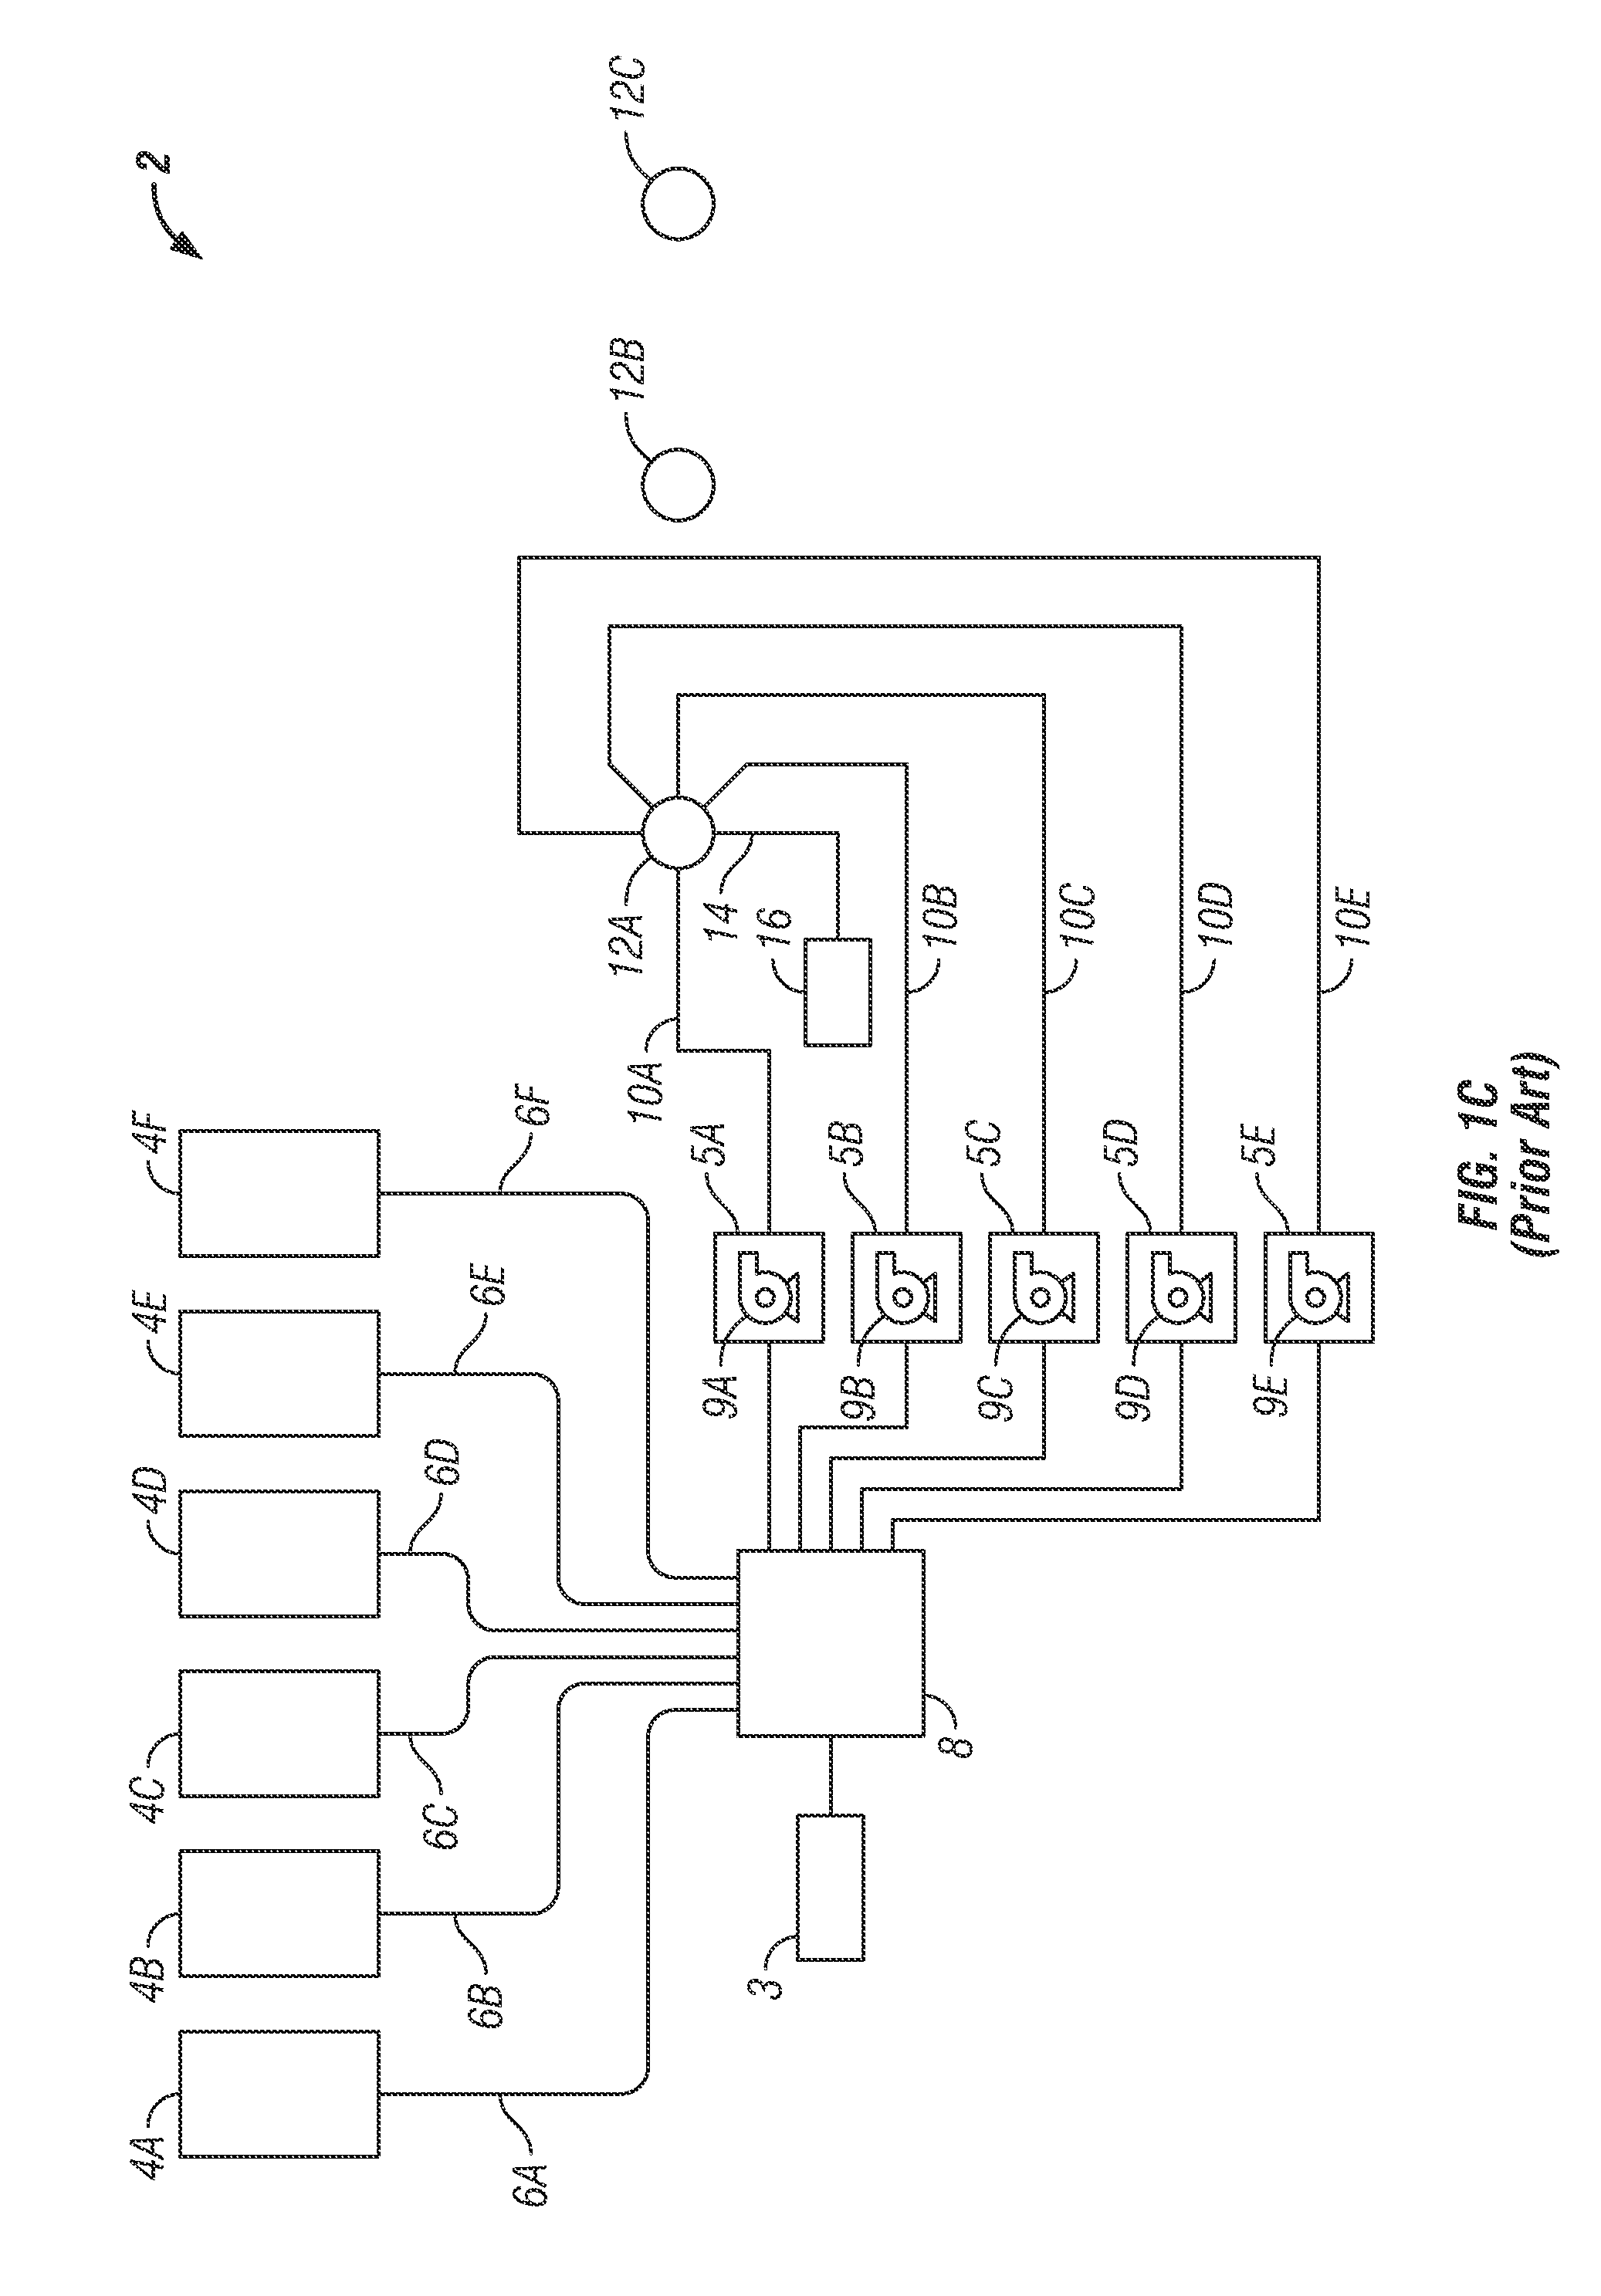 Adjustable support system for manifold to minimize vibration